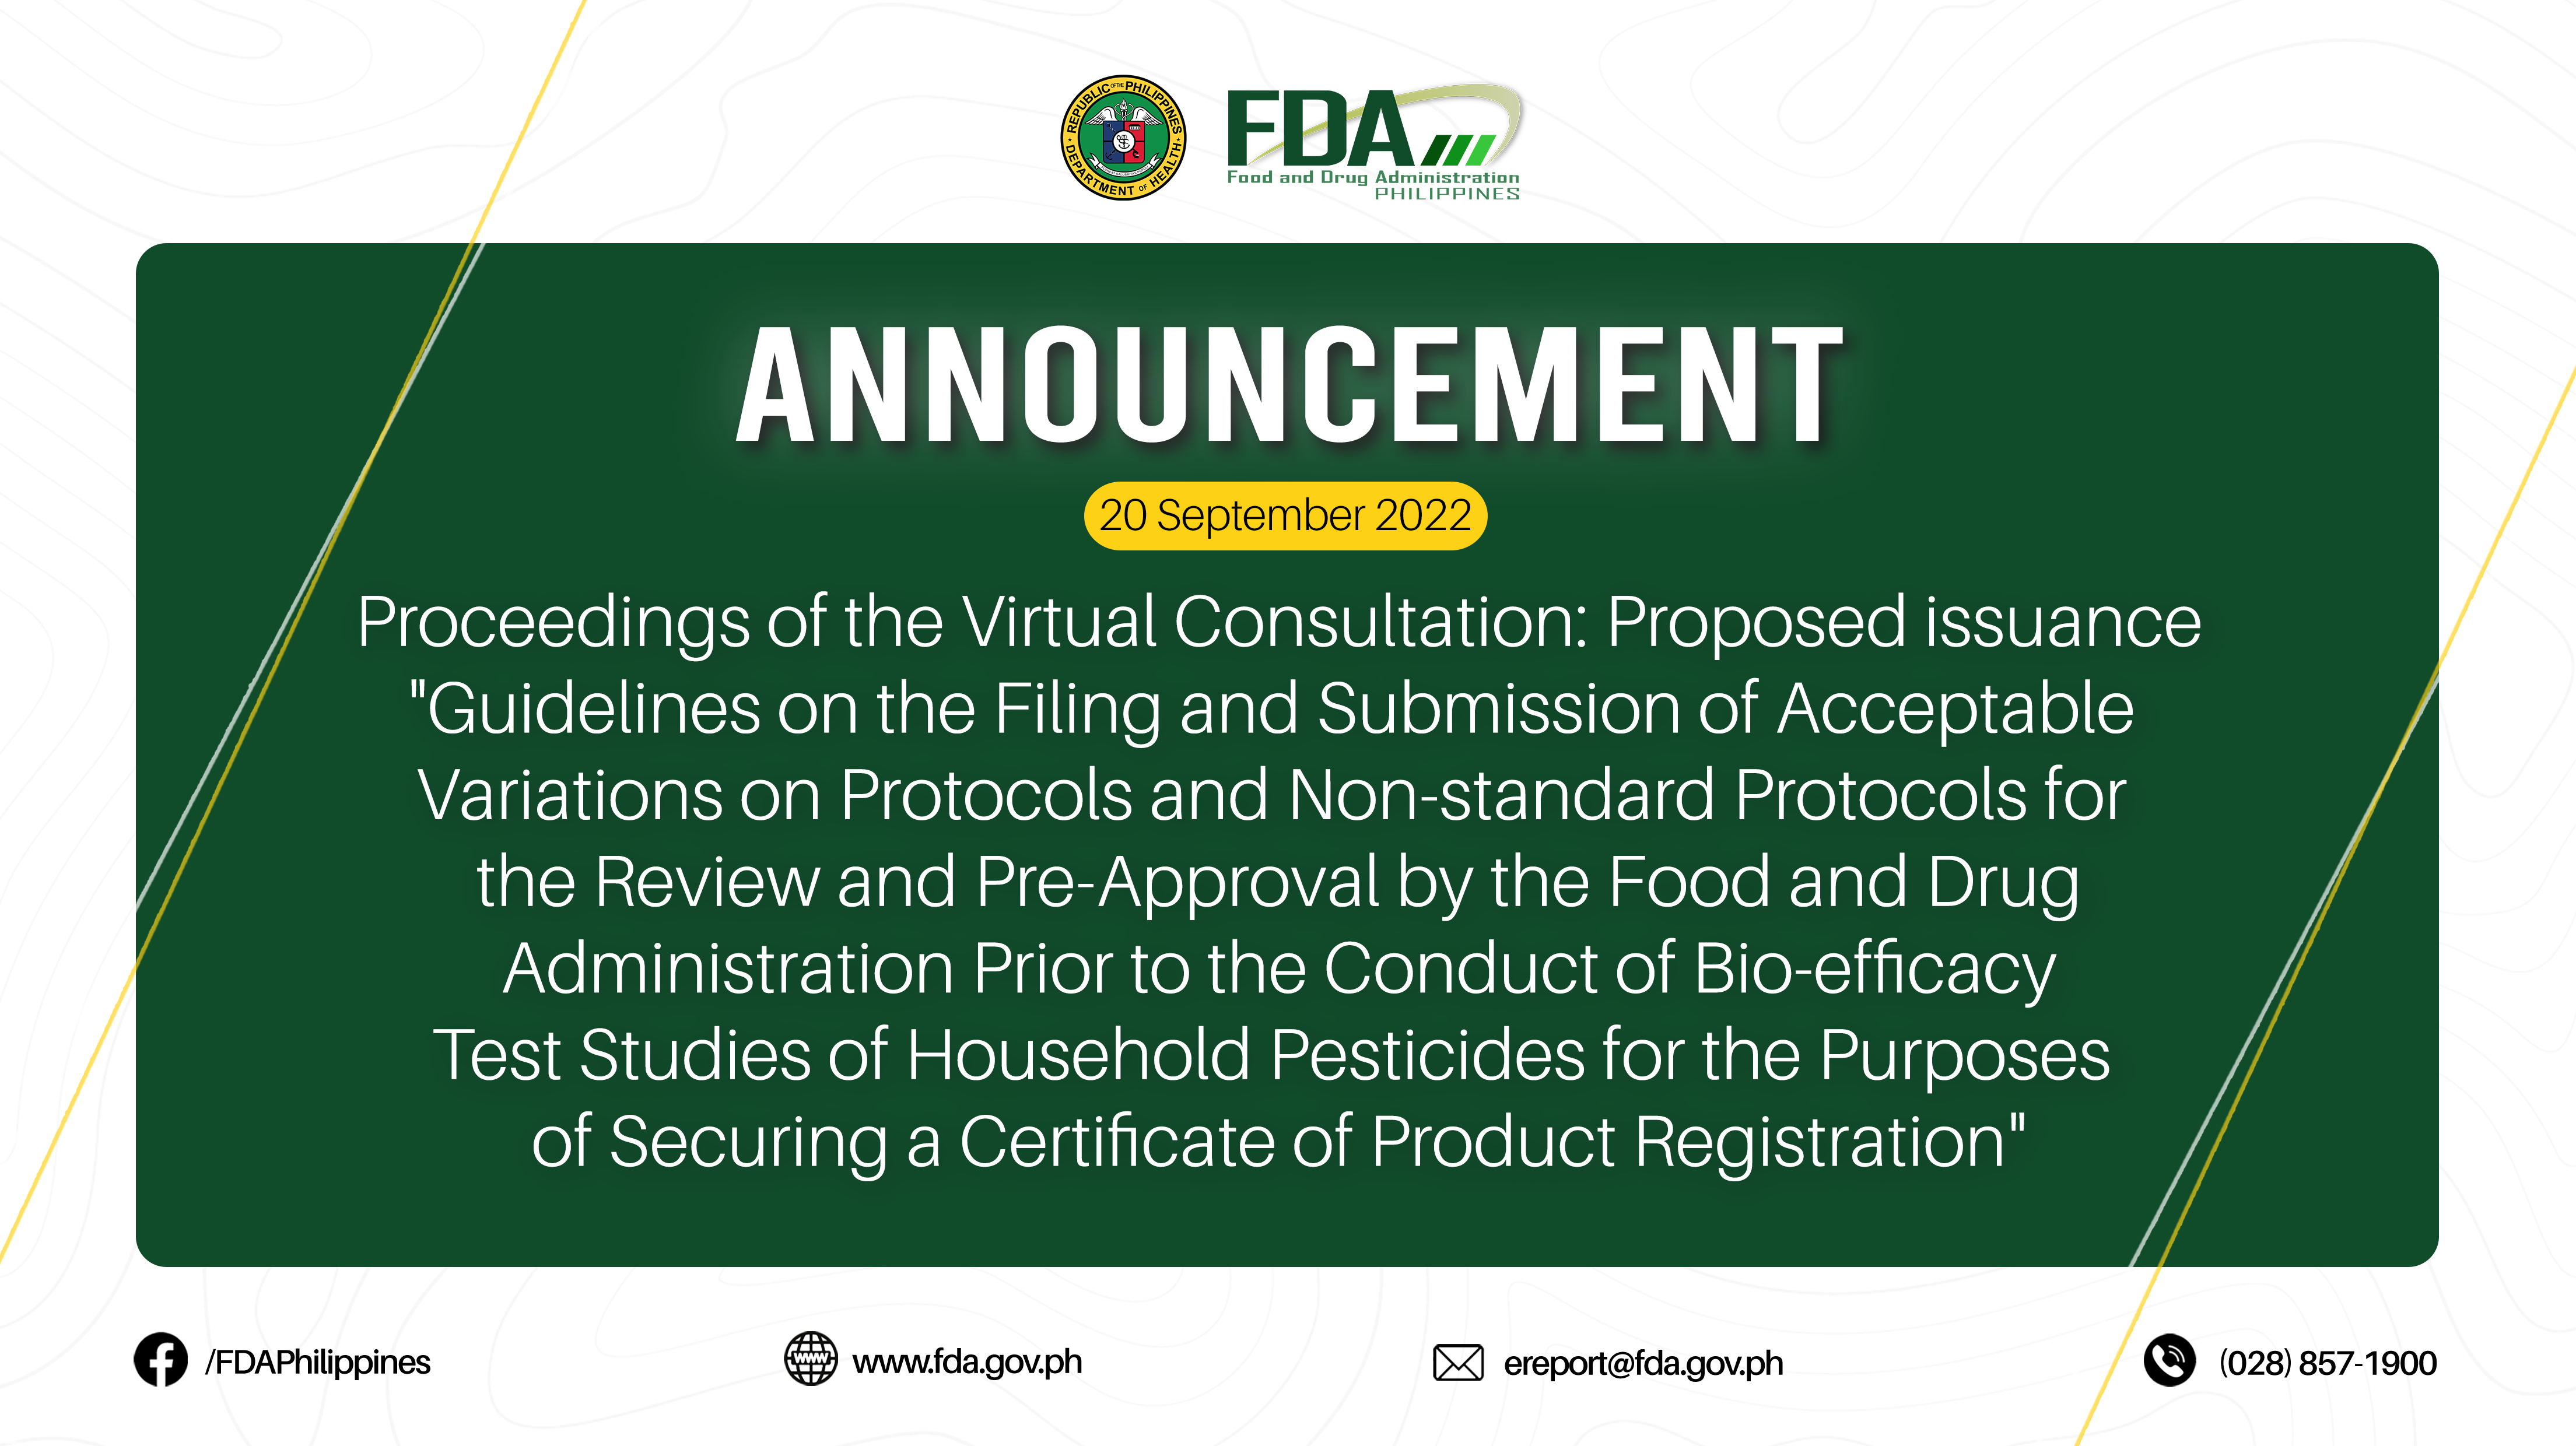 Announcement || Proceedings of the Virtual Consultation: Proposed issuance “Guidelines on the Filing and Submission of Acceptable Variations on Protocols and Non-standard Protocols for the Review and Pre-Approval by the Food and Drug Administration Prior to the Conduct of Bio-efficacy Test Studies of Household Pesticides for the Purposes of Securing a Certificate of Product Registration”